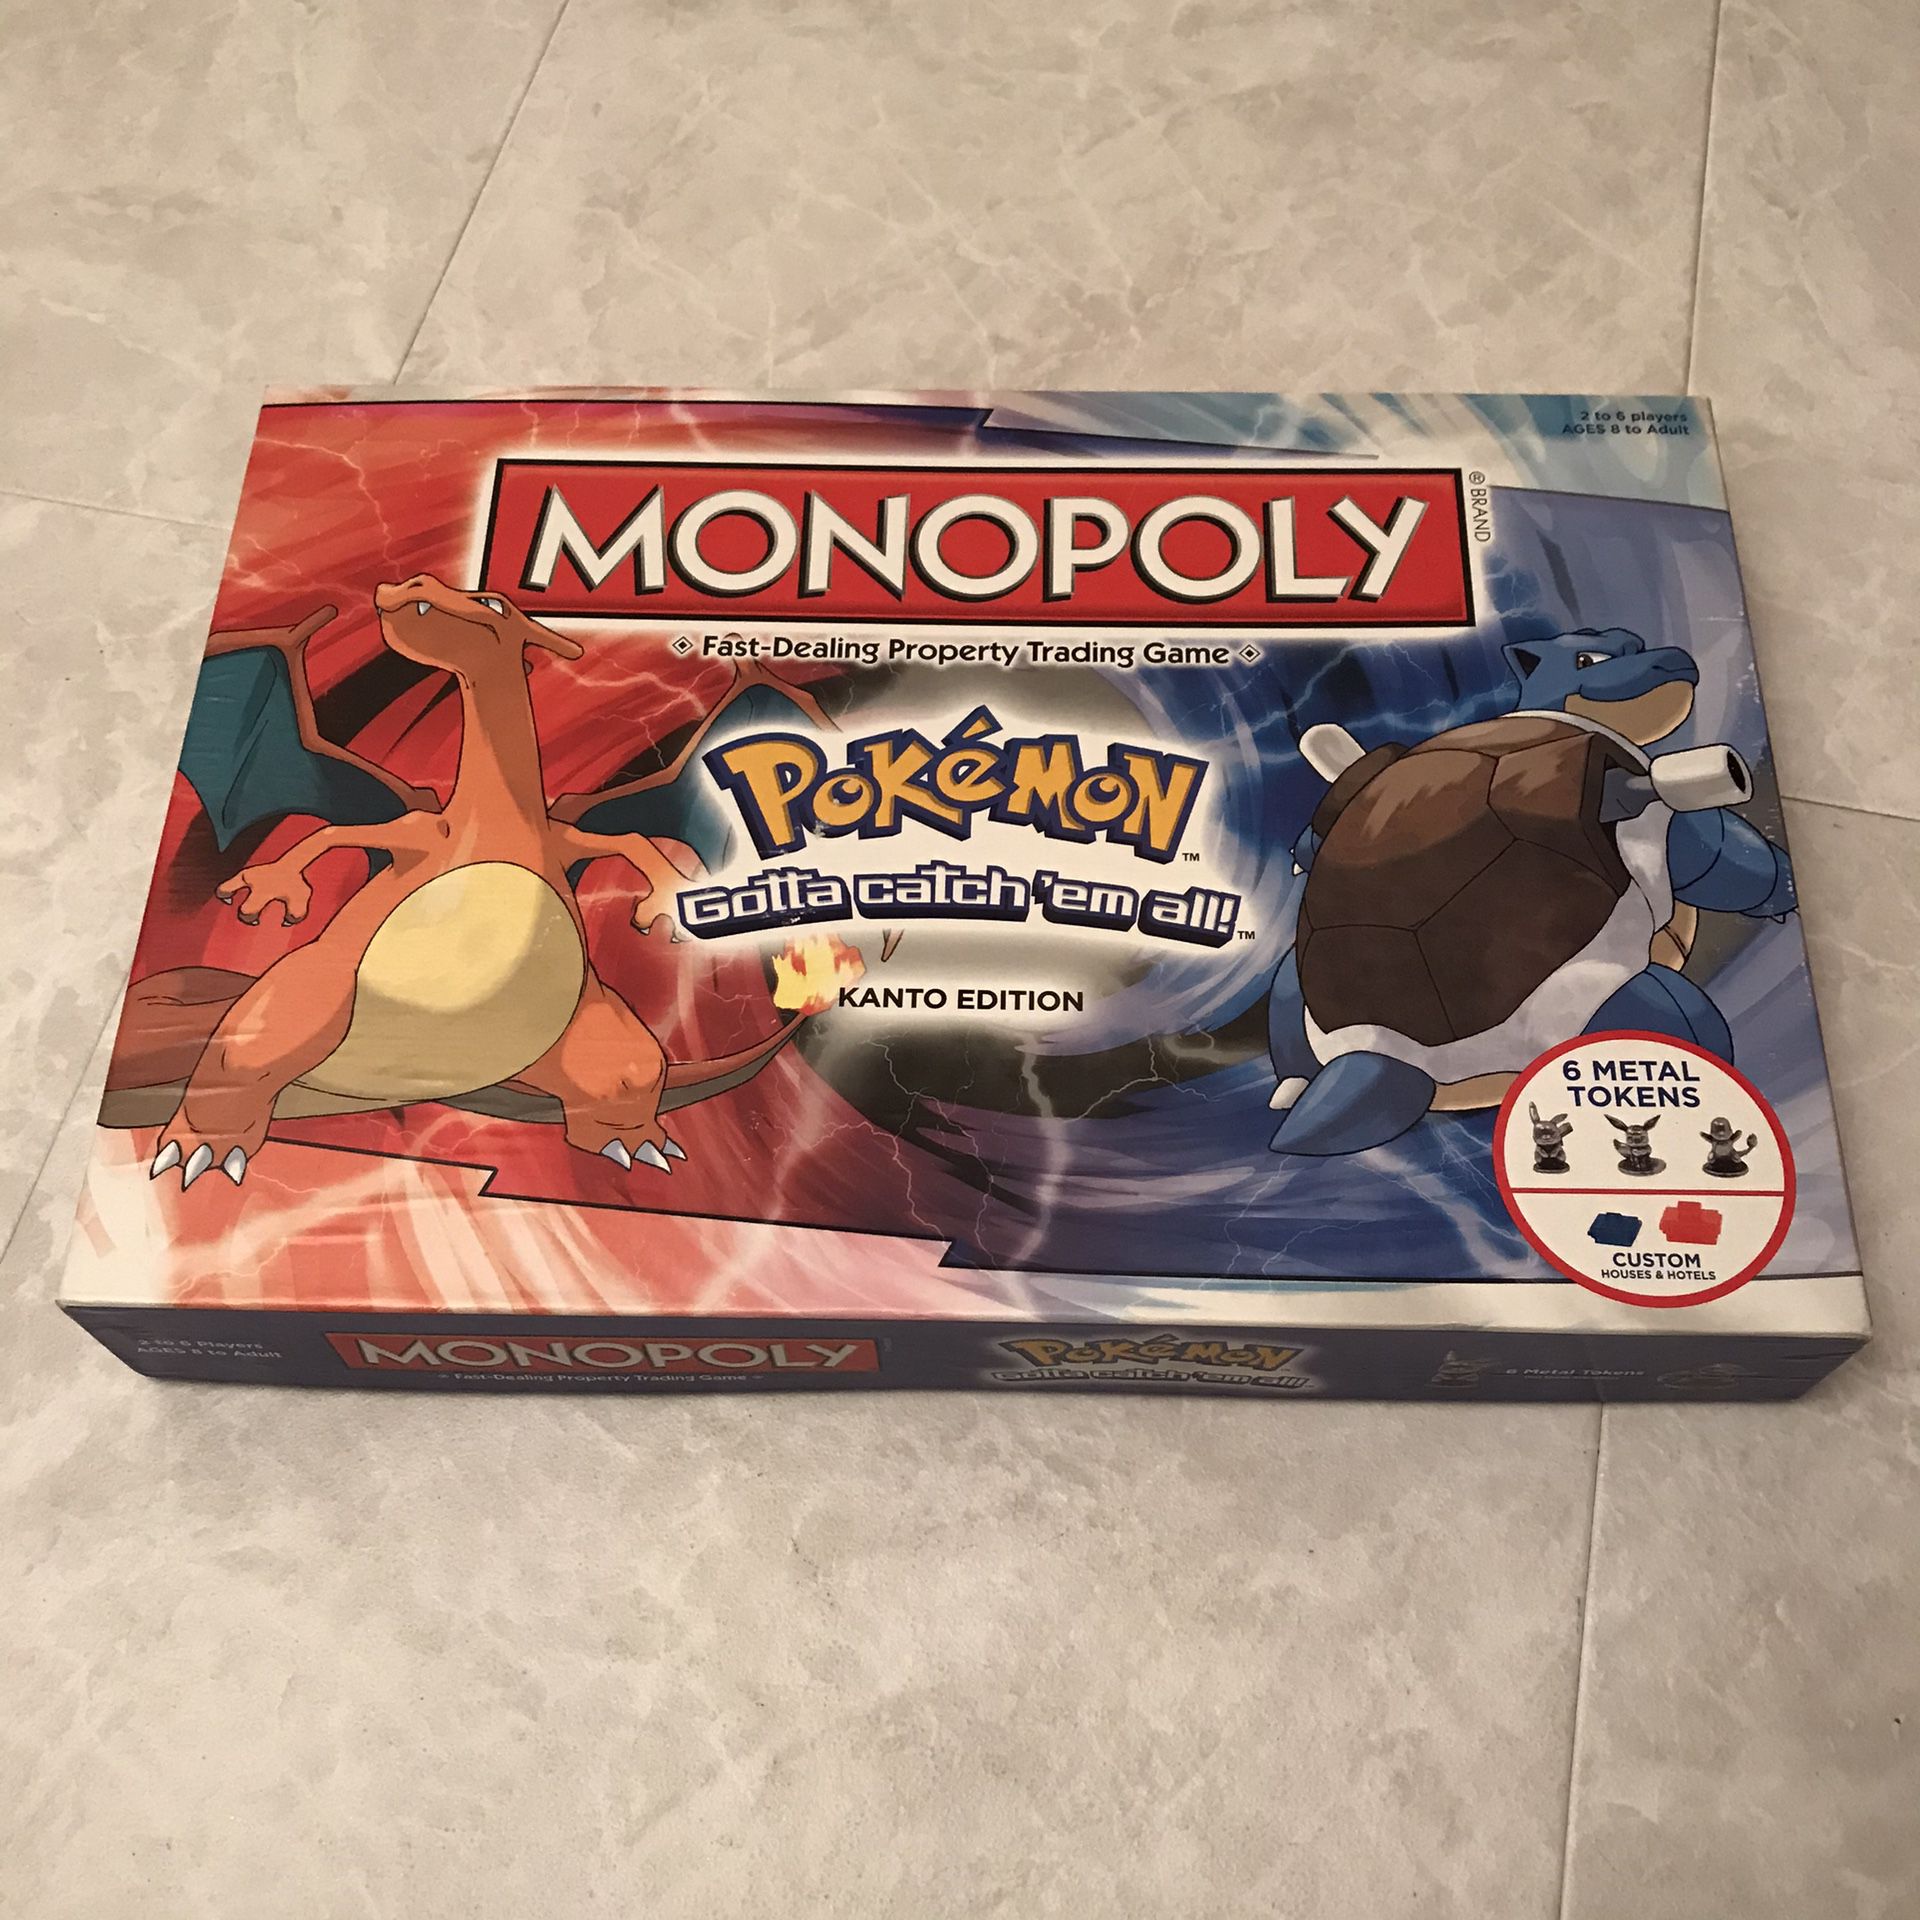 Pokemon Monopoly Kanto Edition Board Game Complete In Box All Pieces Counted